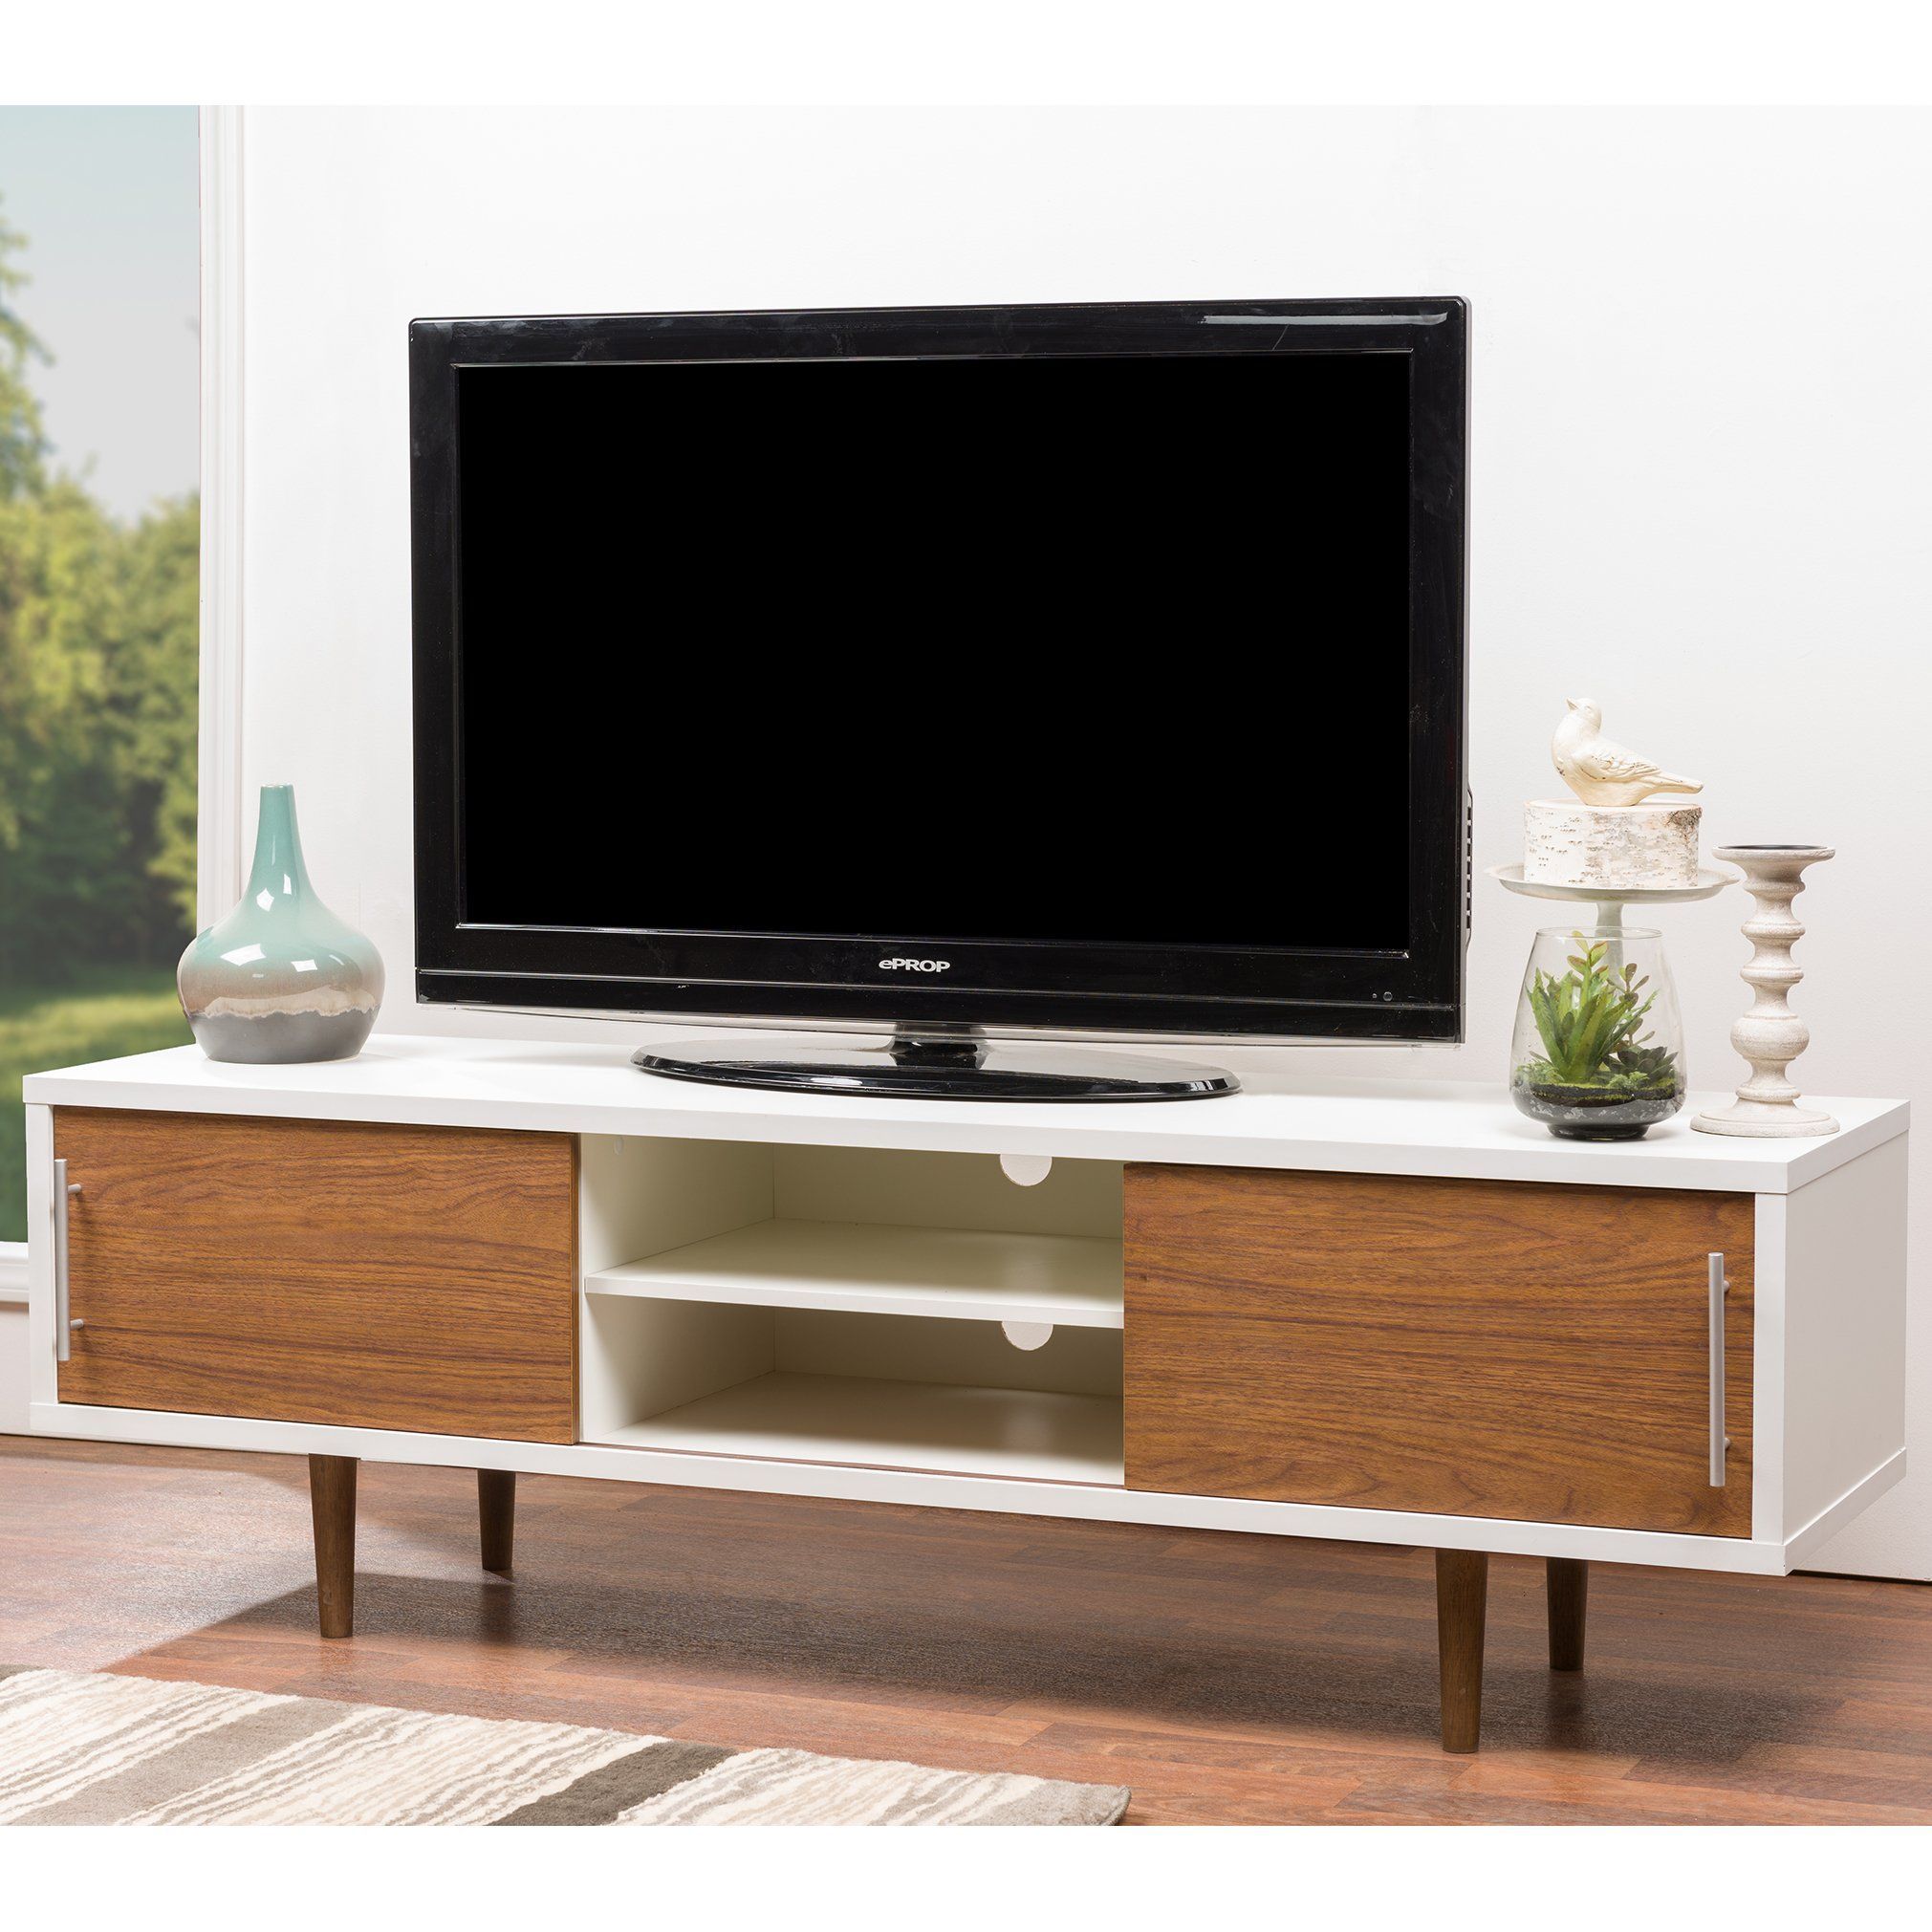 Baxton Studio Gemini Wood Contemporary Tv Stand, White Inside White Tv Stand Modern (View 3 of 15)